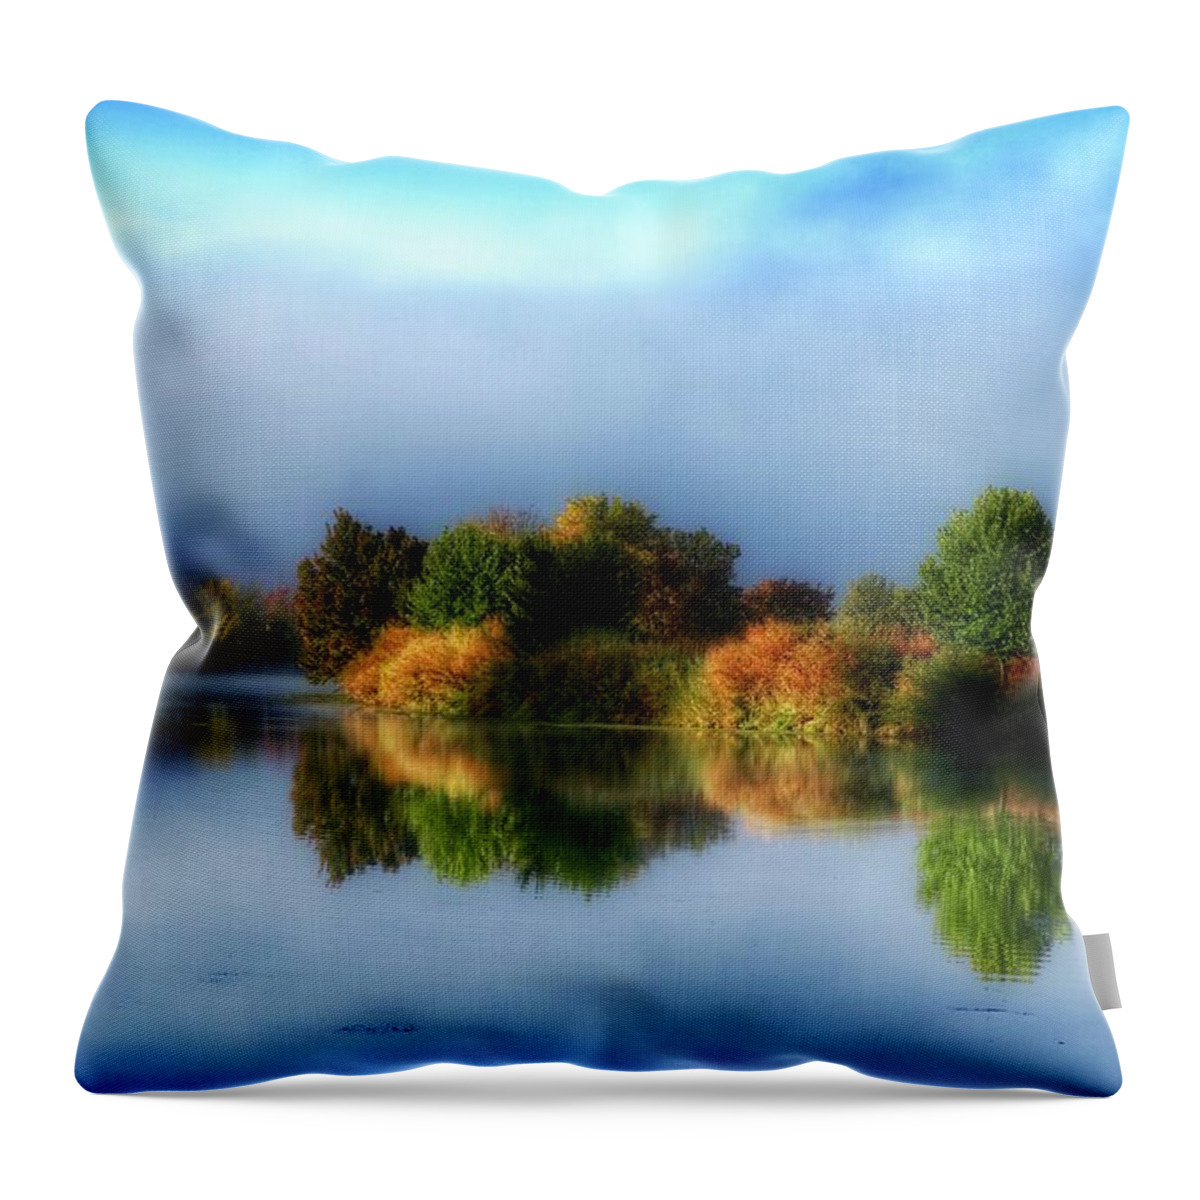 Misty Fall Colors On The River Throw Pillow featuring the photograph Misty fall colors on the river by Lynn Hopwood